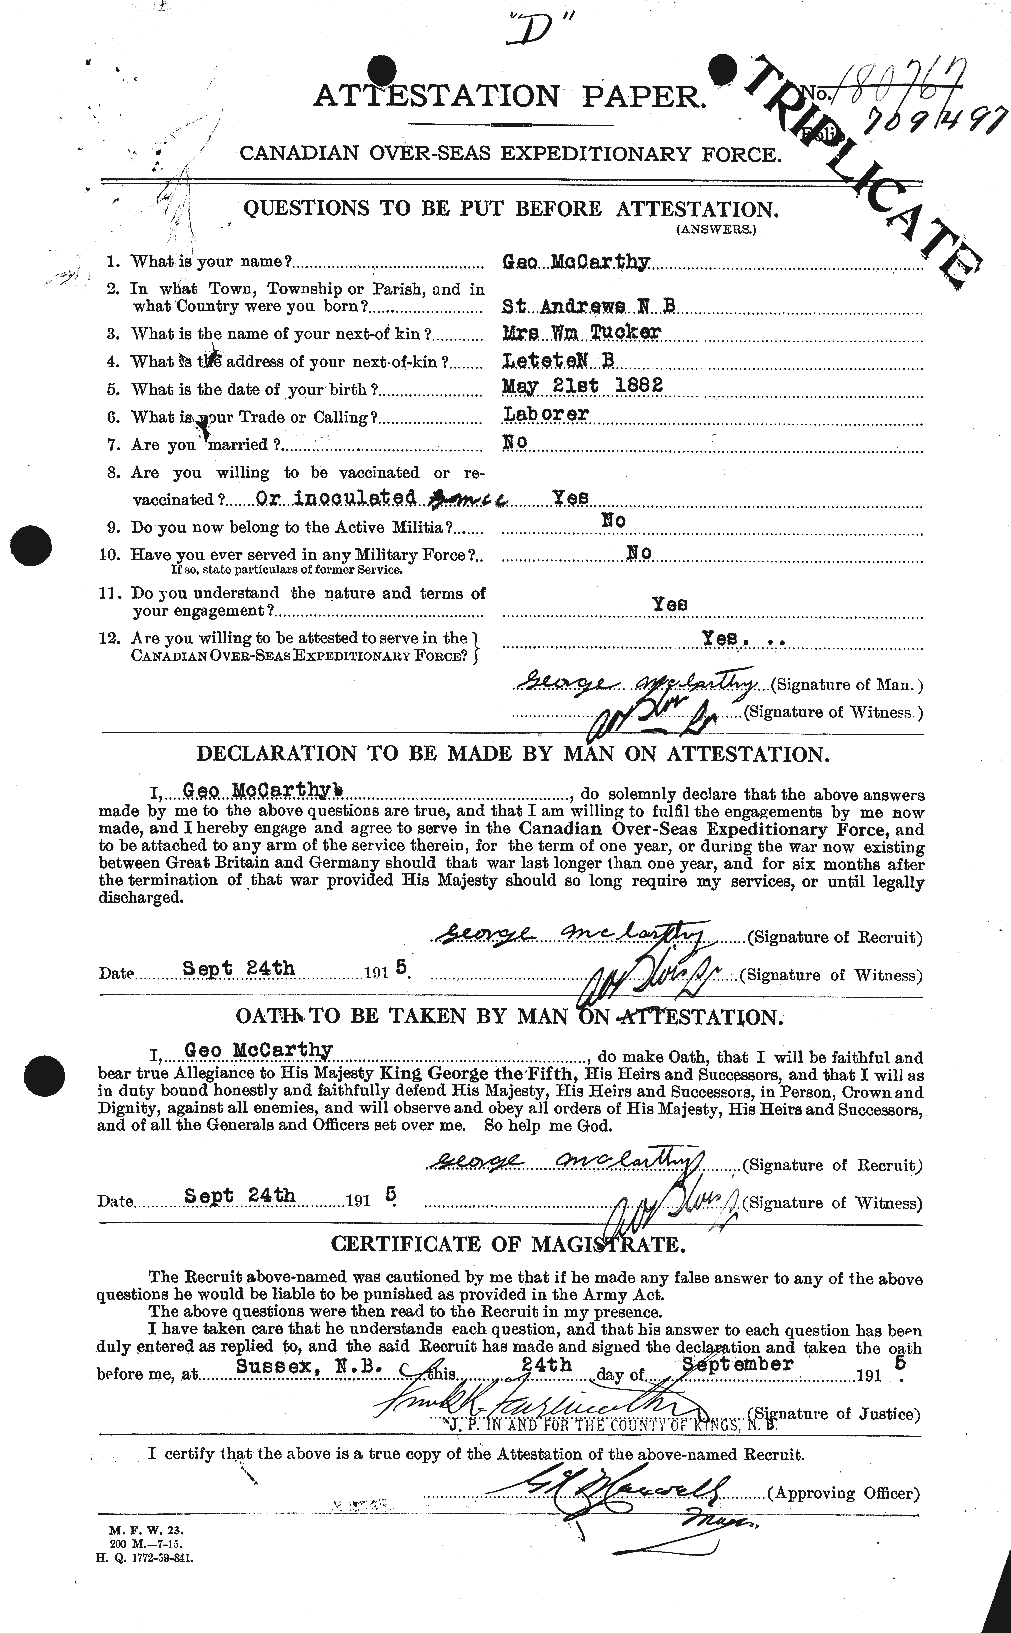 Personnel Records of the First World War - CEF 132232a